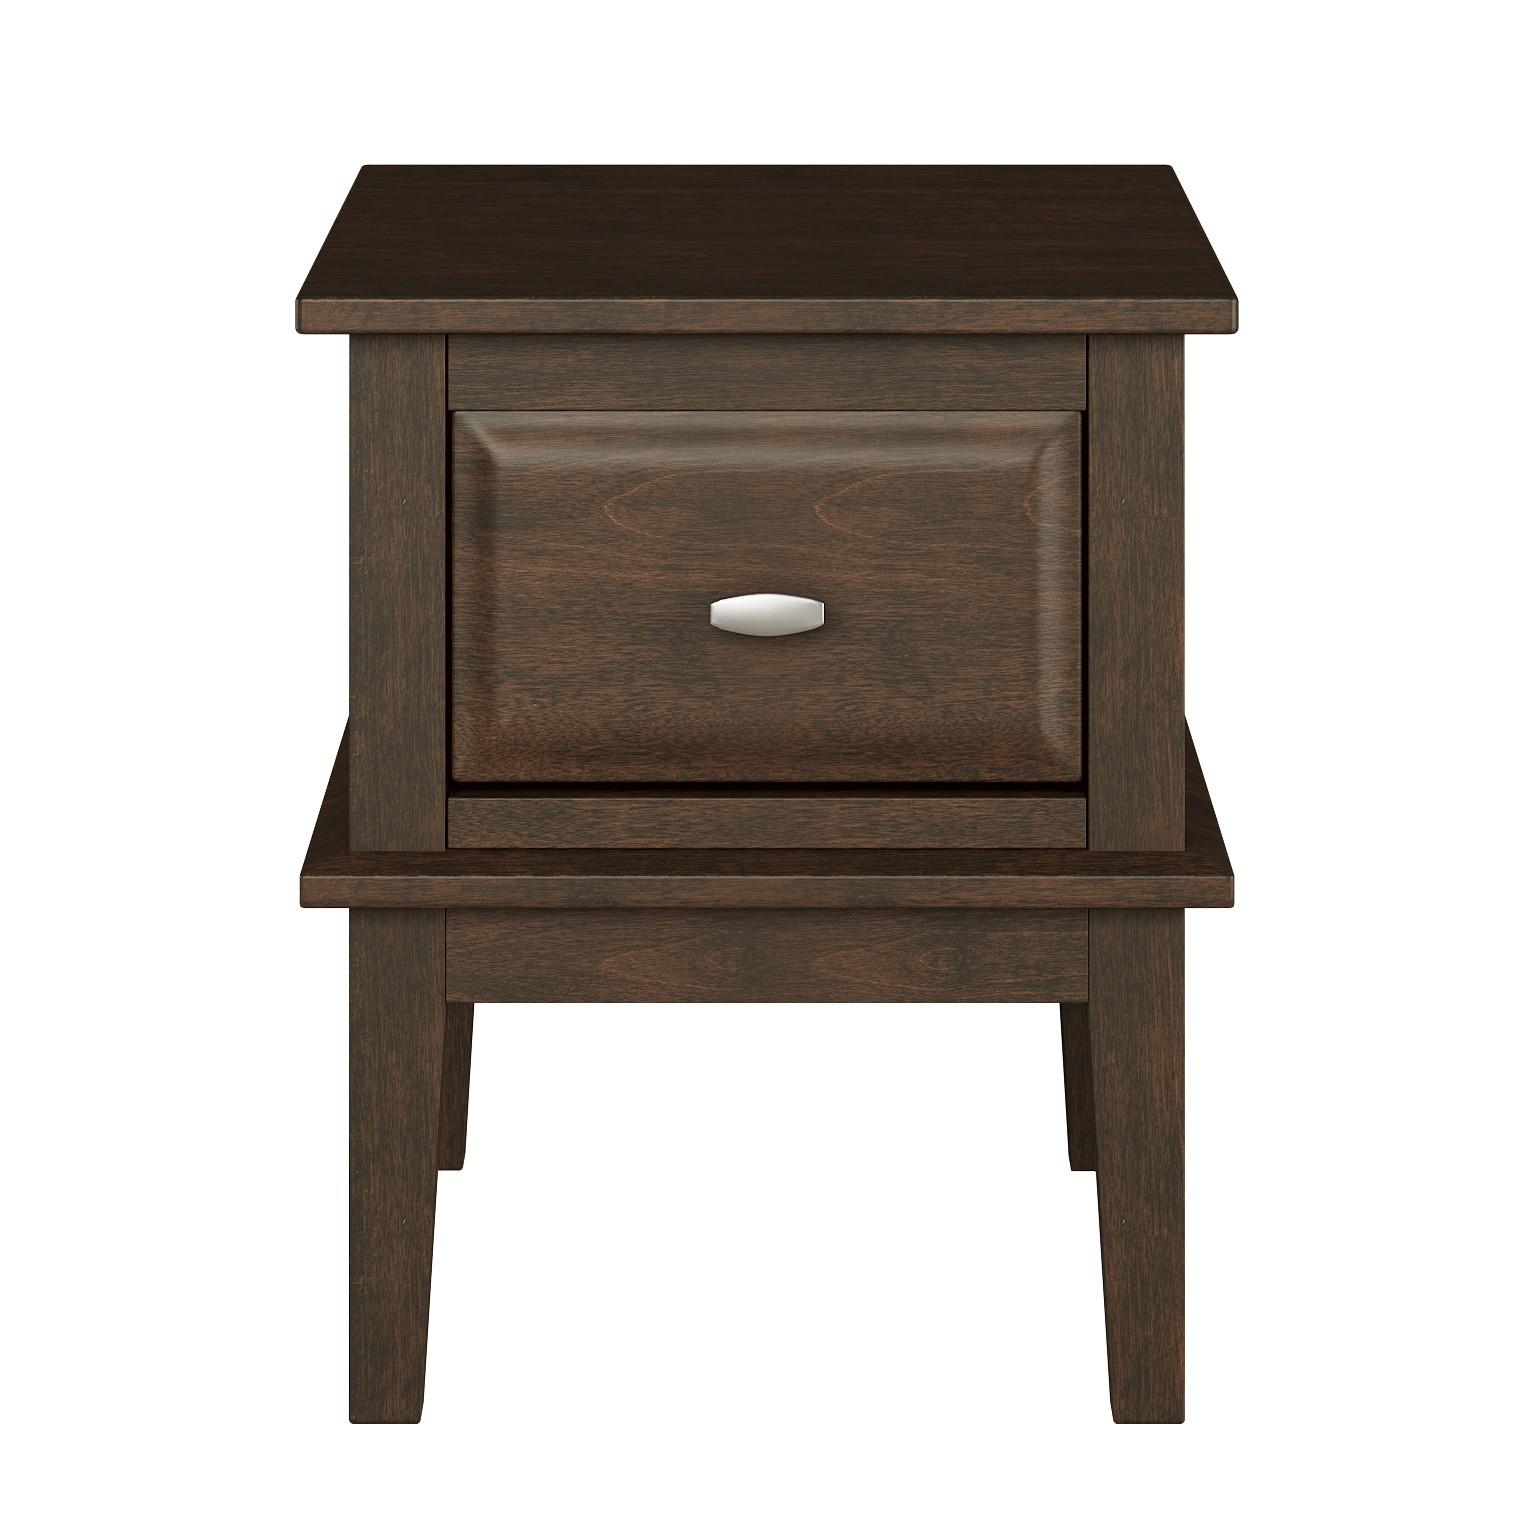 Transitional End Table 3621-04 Minot 3621-04 in Cherry 